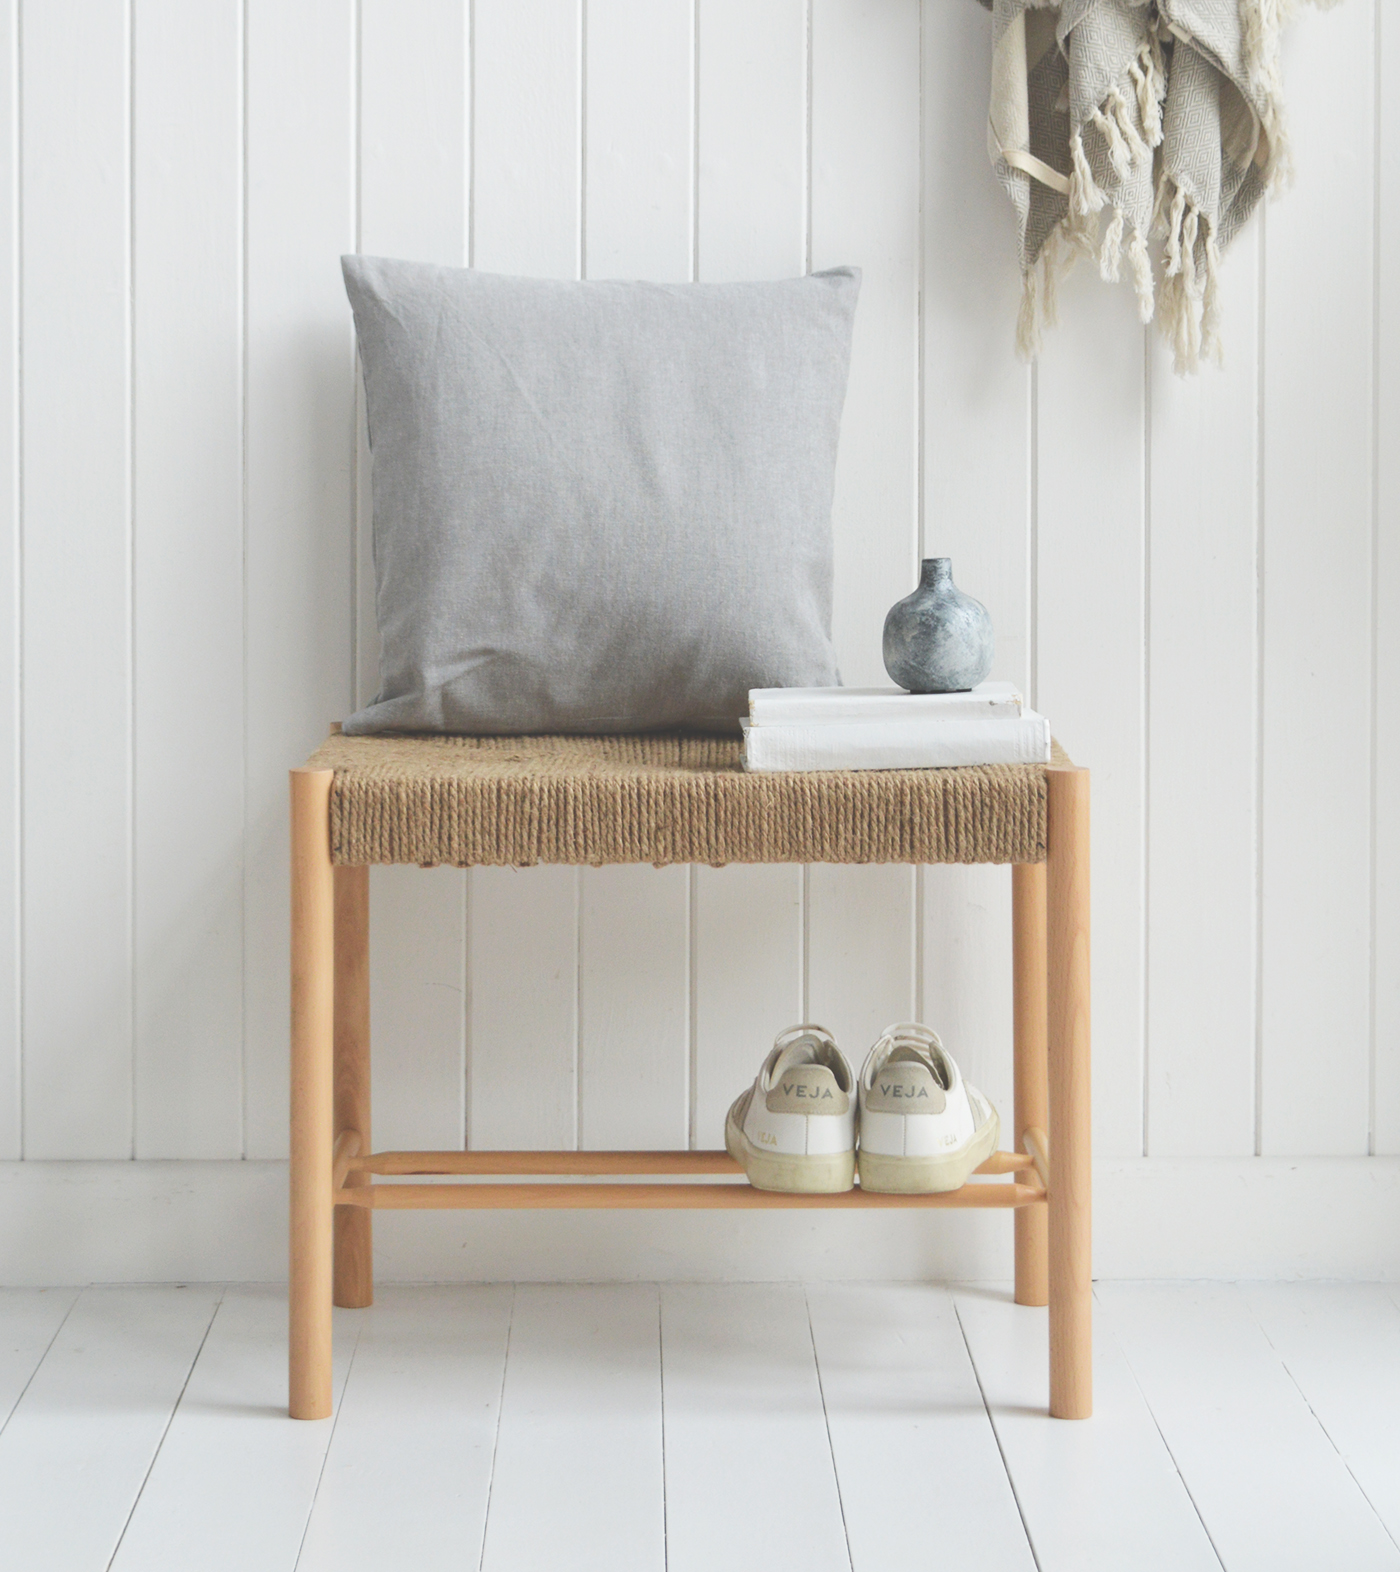 Wakefield Woven Wood Benches - Bench and Stool for New England modern farmhouse, country and coastal furniture and interiors